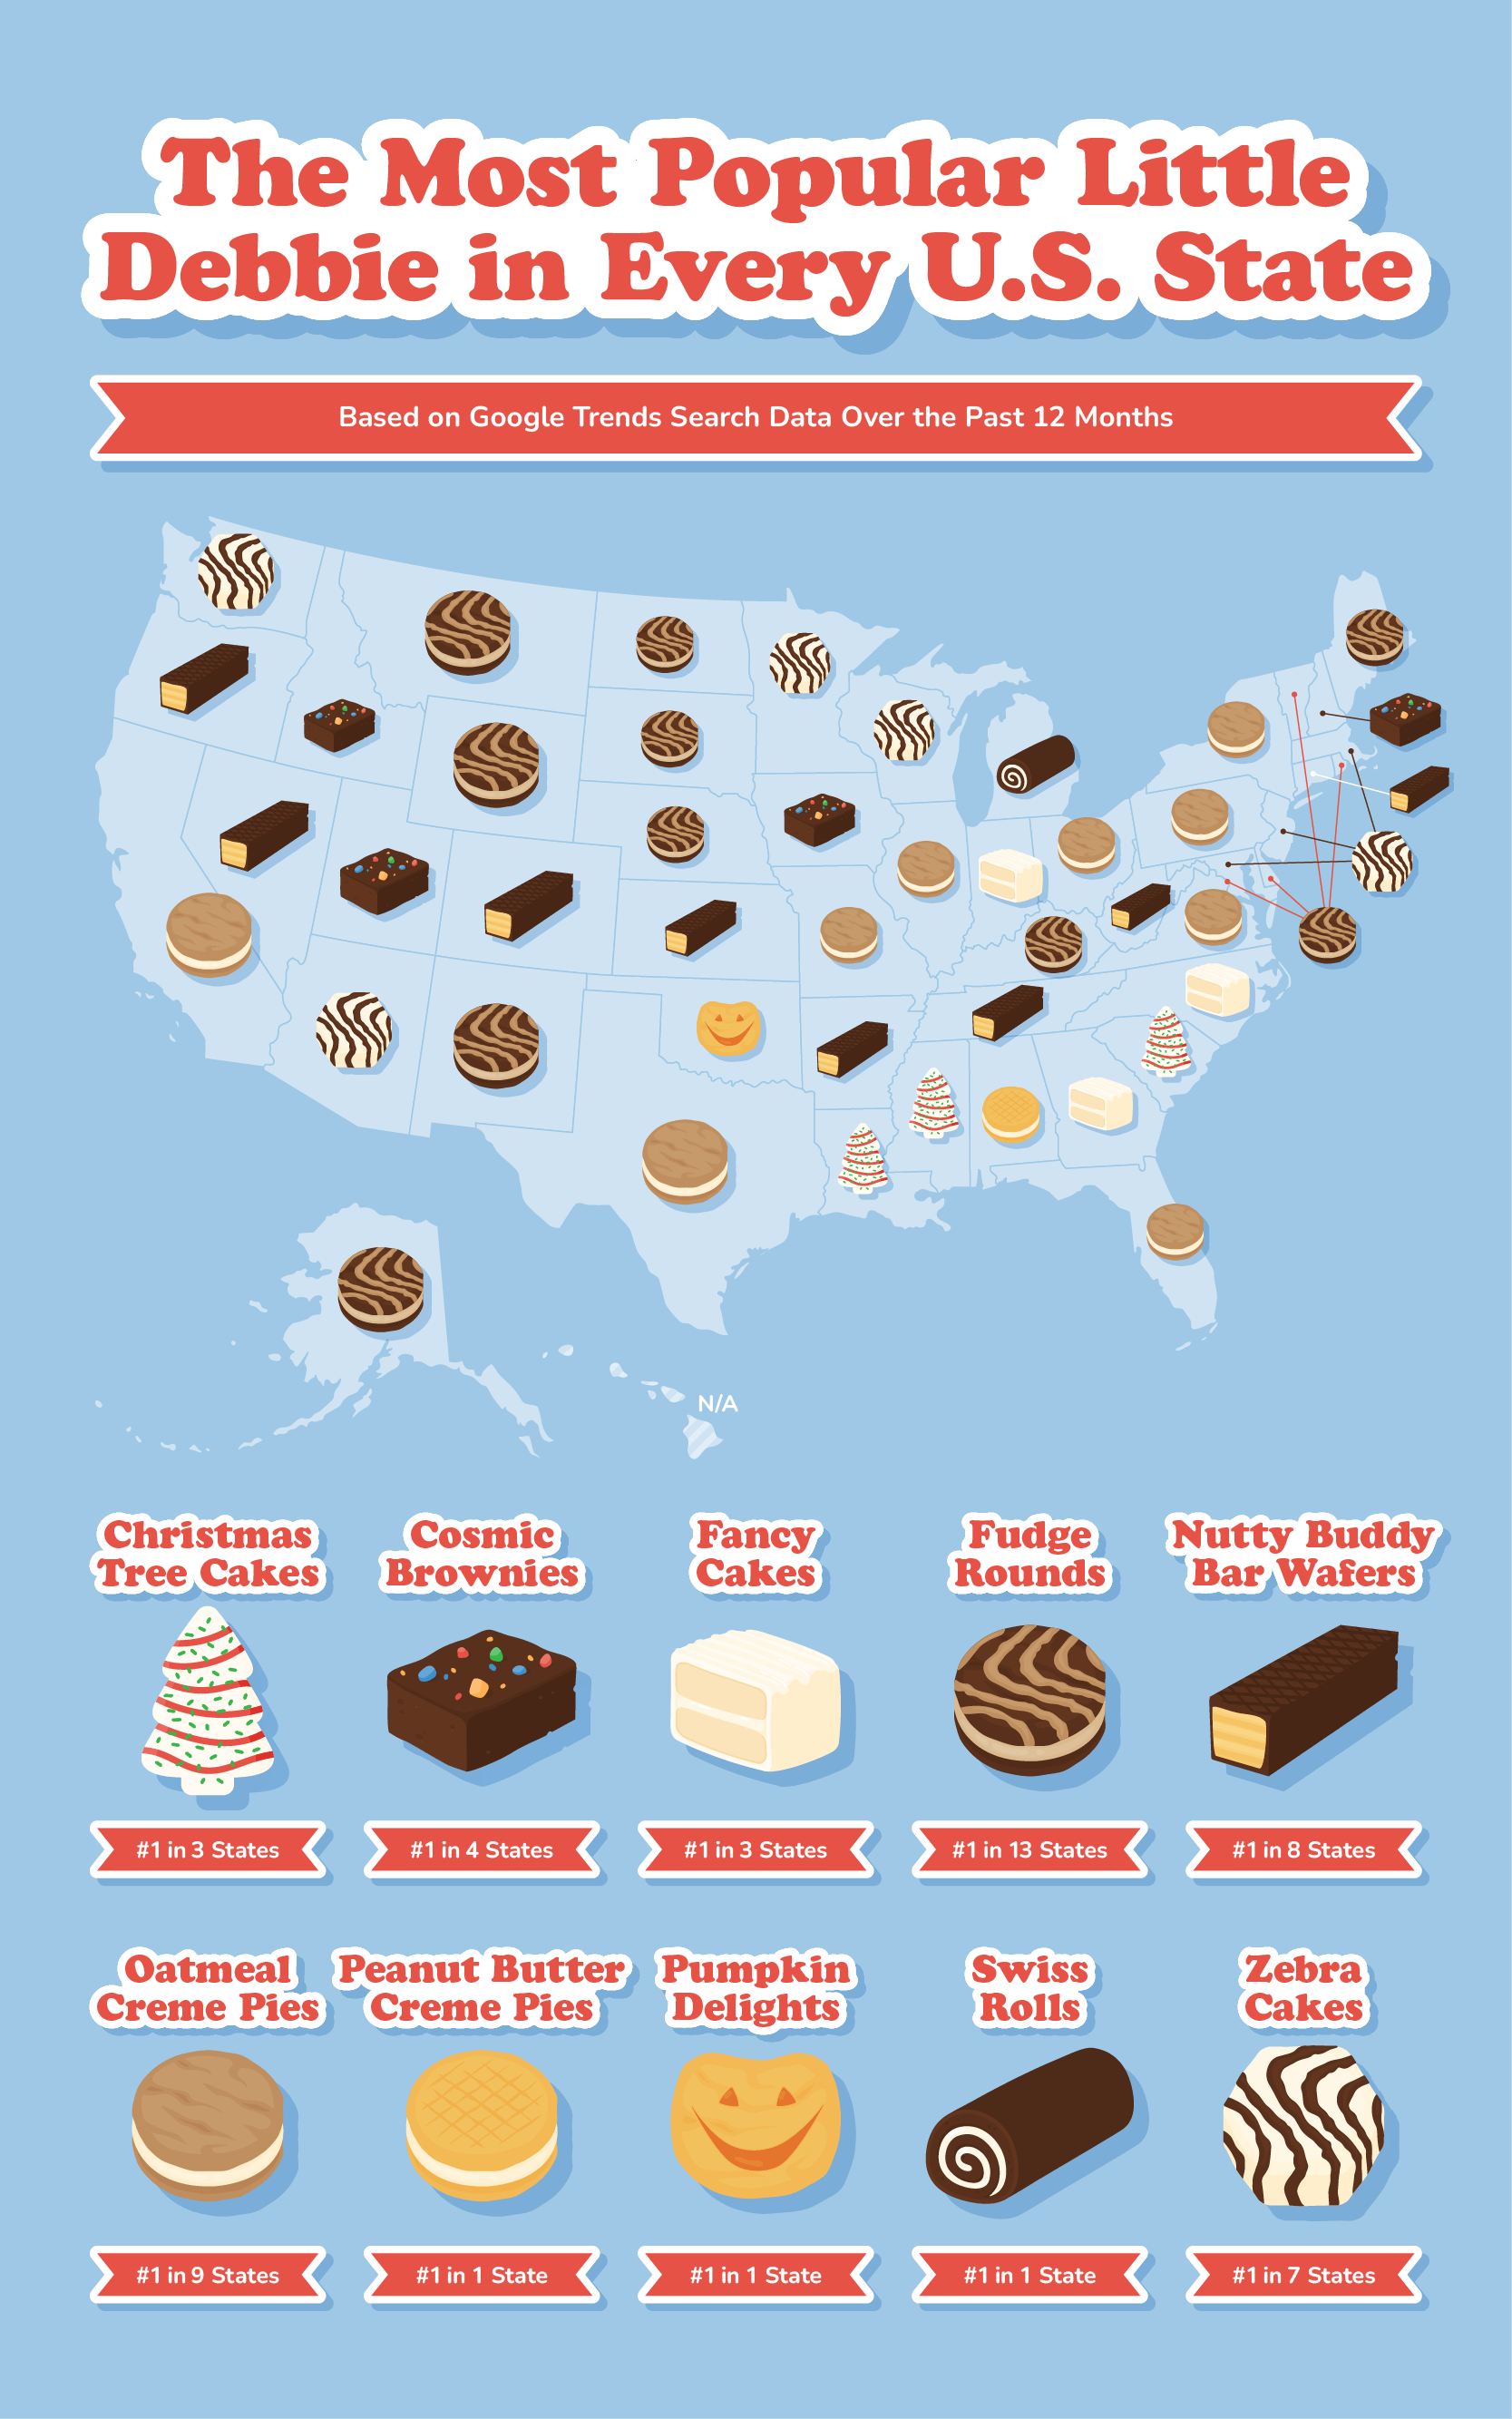 A U.S. map showing the most popular Little Debbie snack in every state